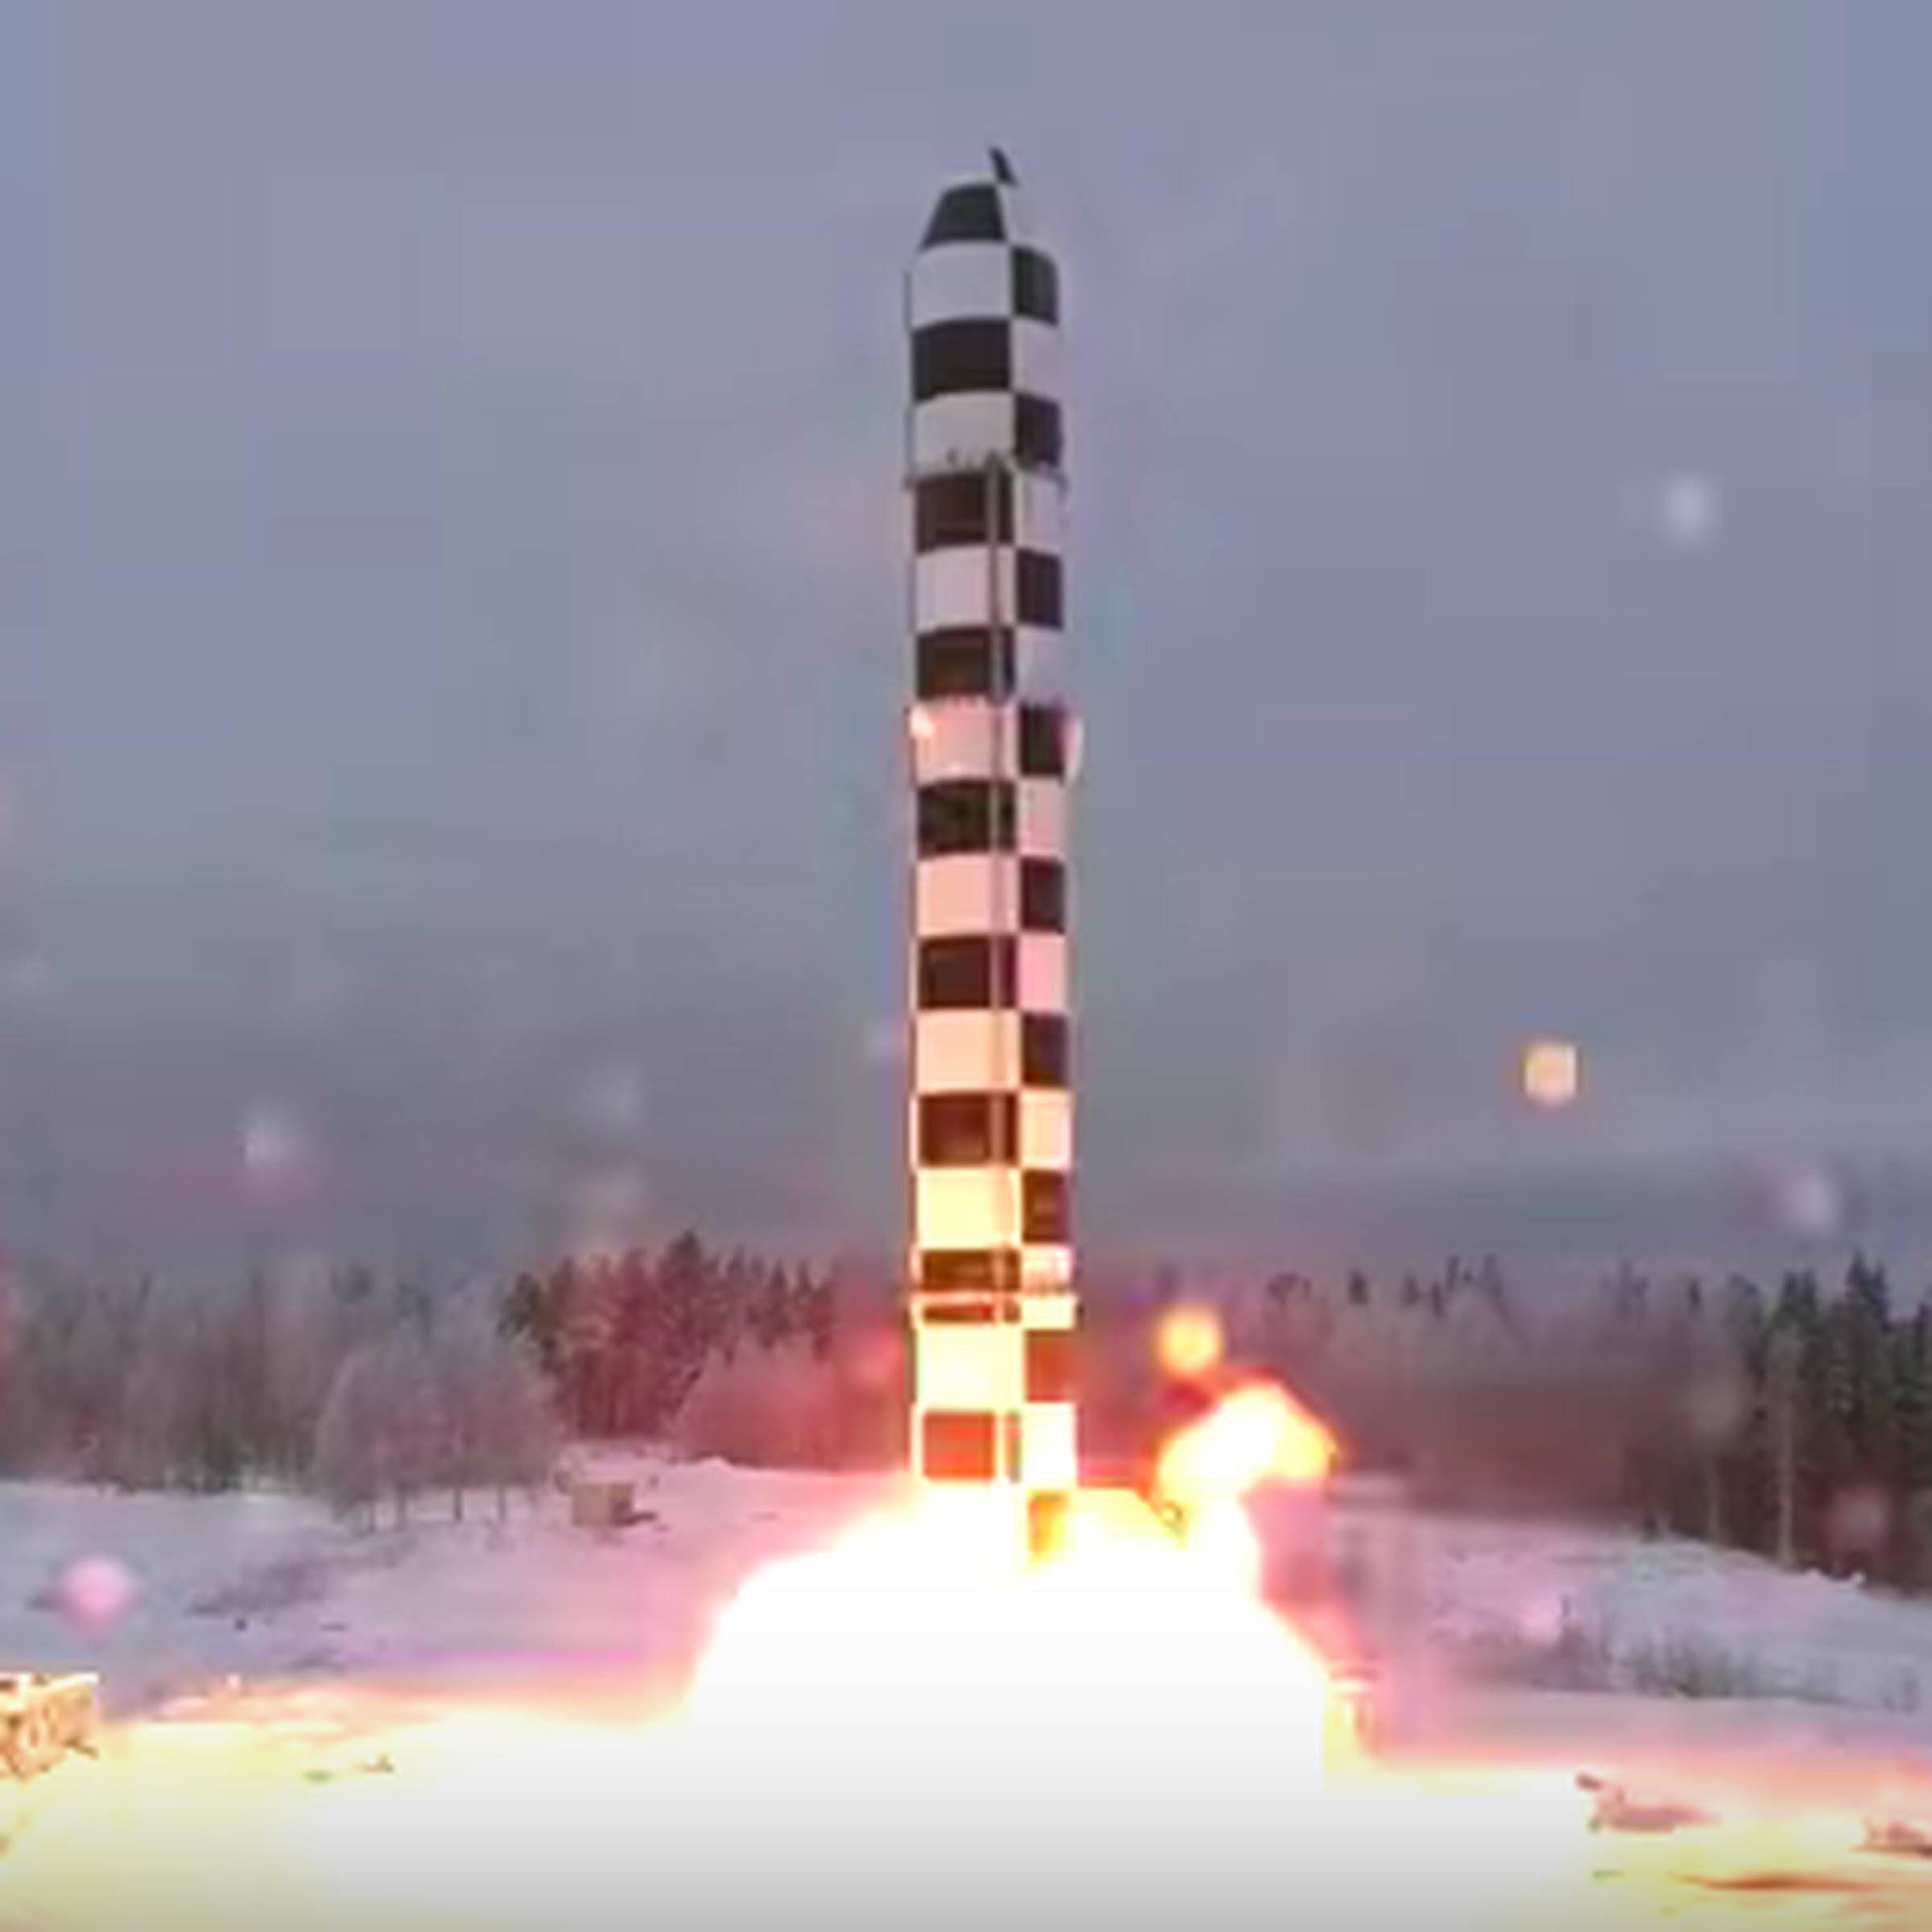 Missile test from Russia-24.